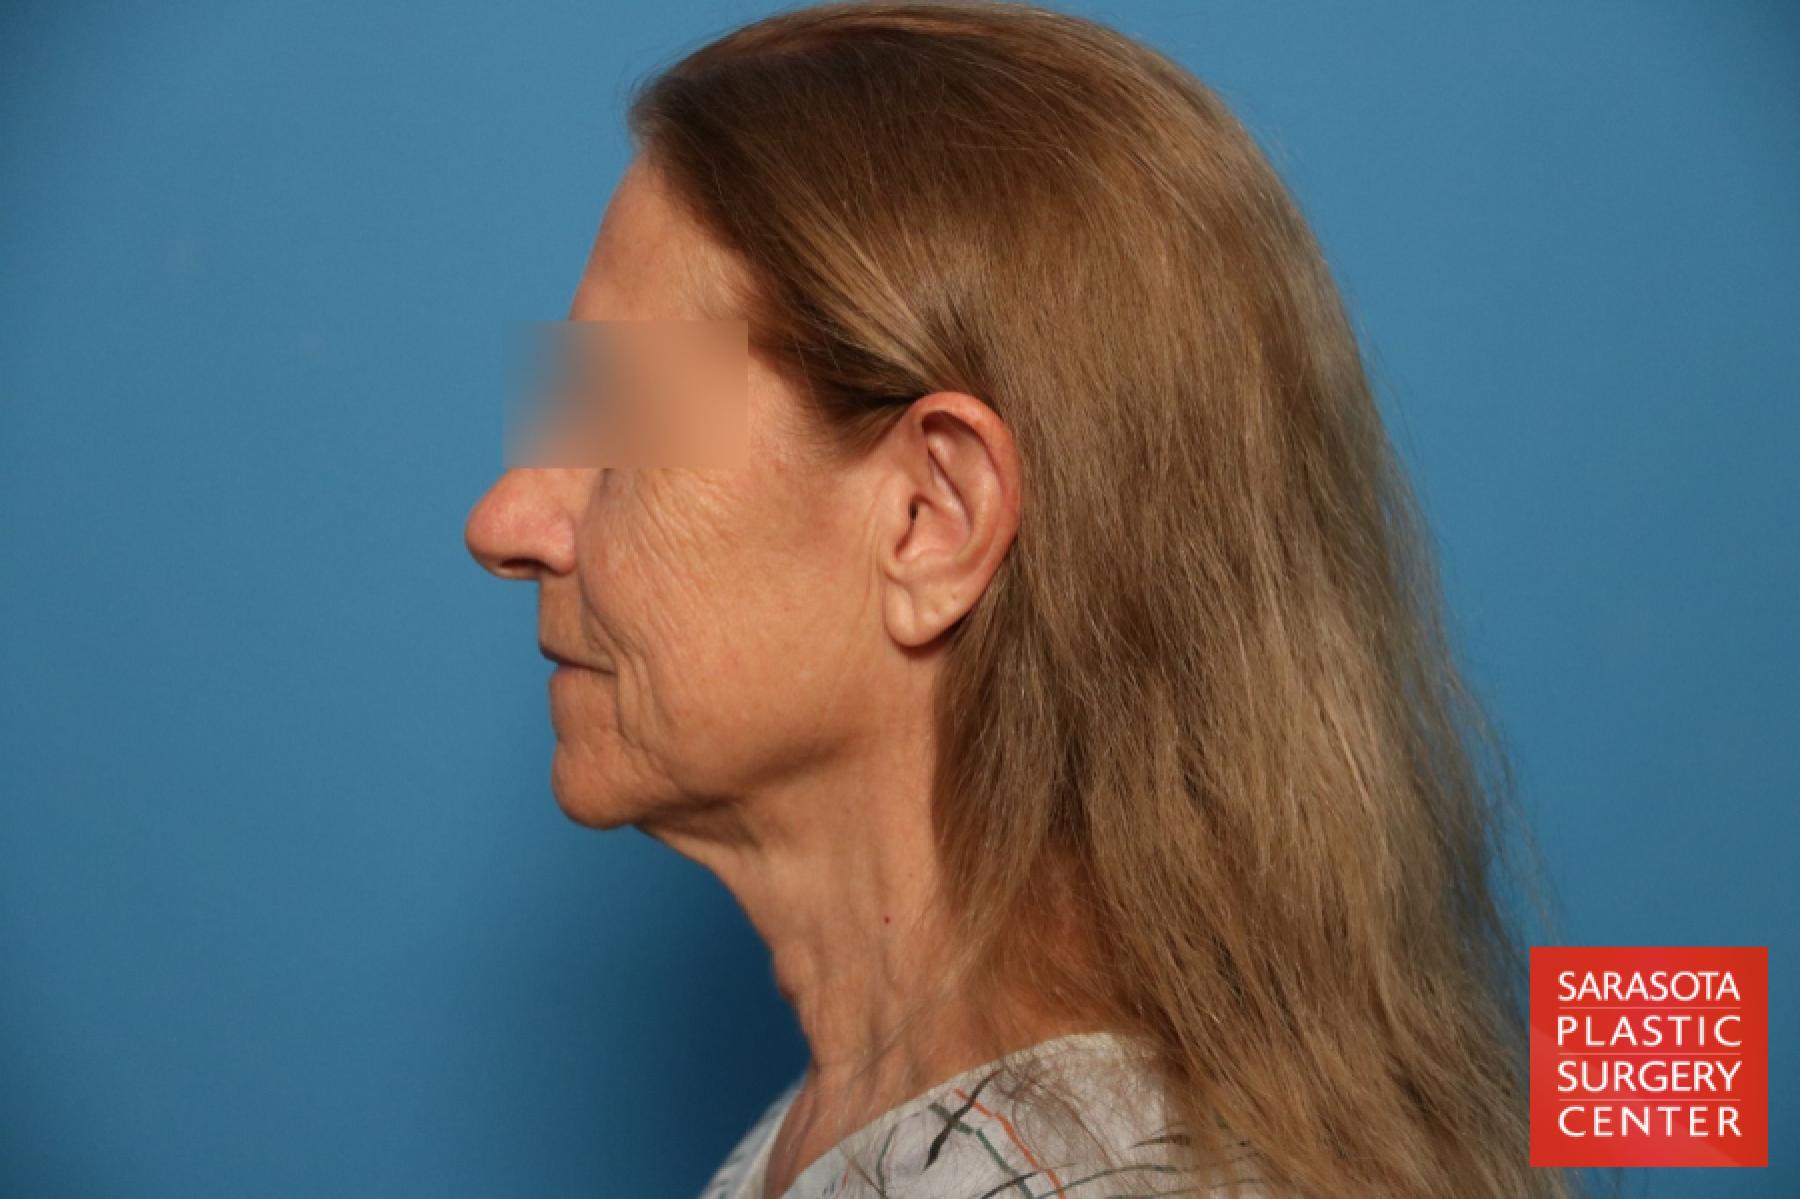 Facelift: Patient 22 - Before and After 3